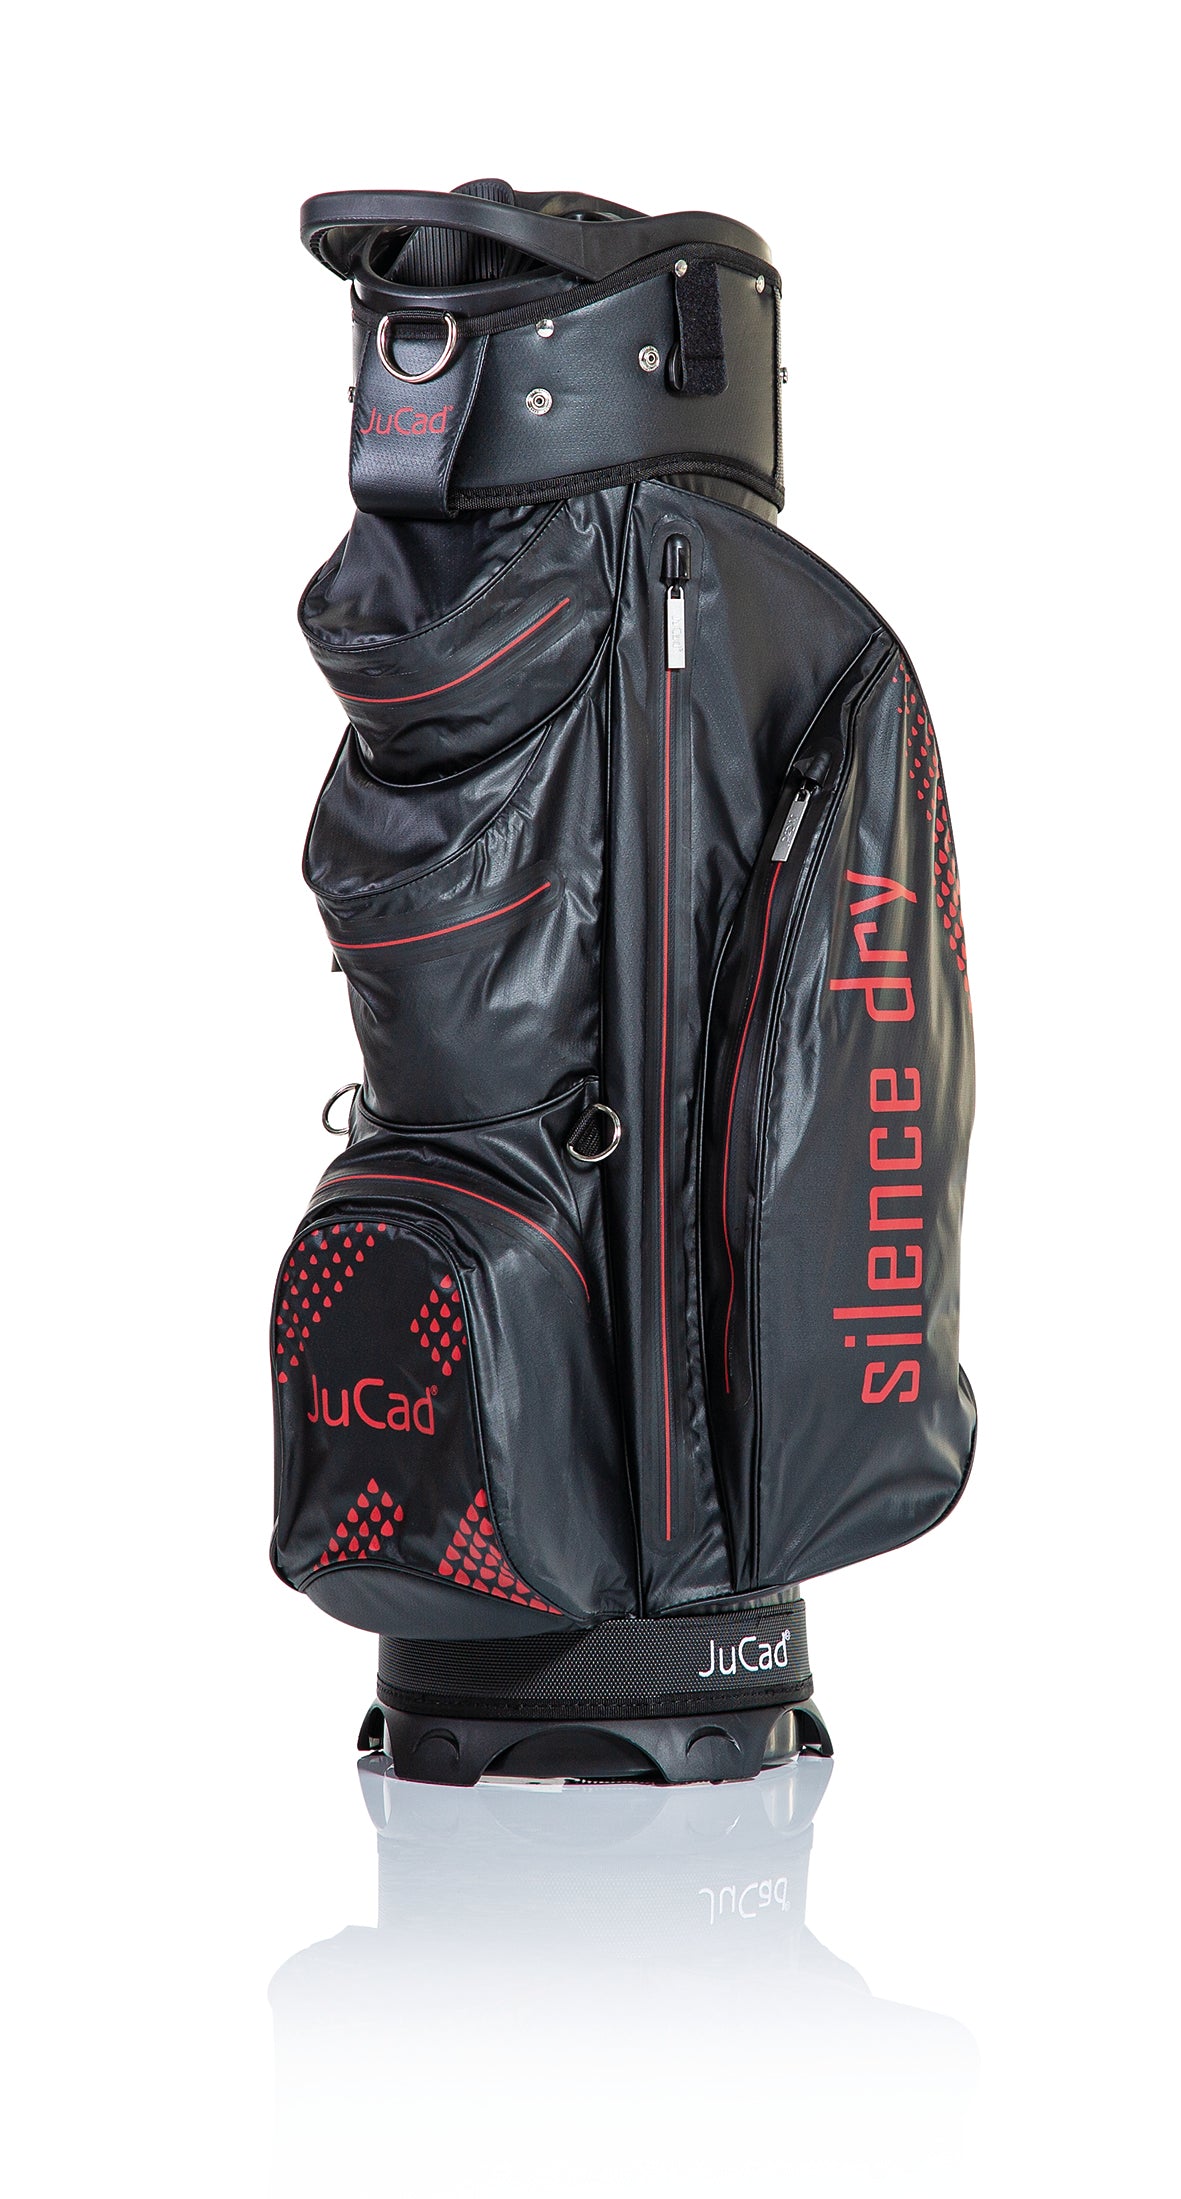 JuCad golf bag Silence Dry - waterproof bag with click system